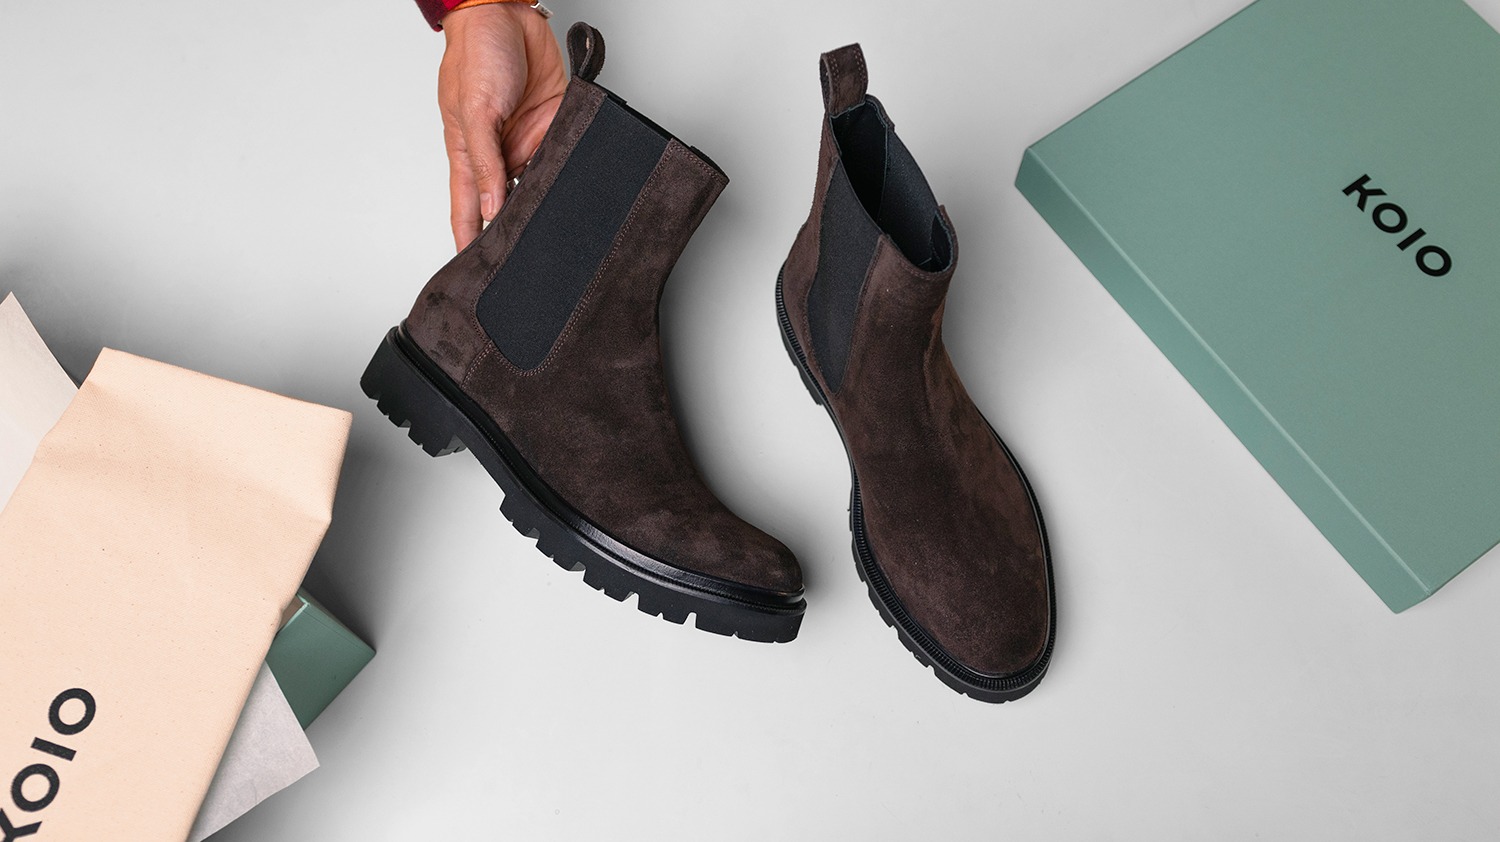 The Koio Chelsea Boot: A Rugged Winter Boot Worth Your Consideration